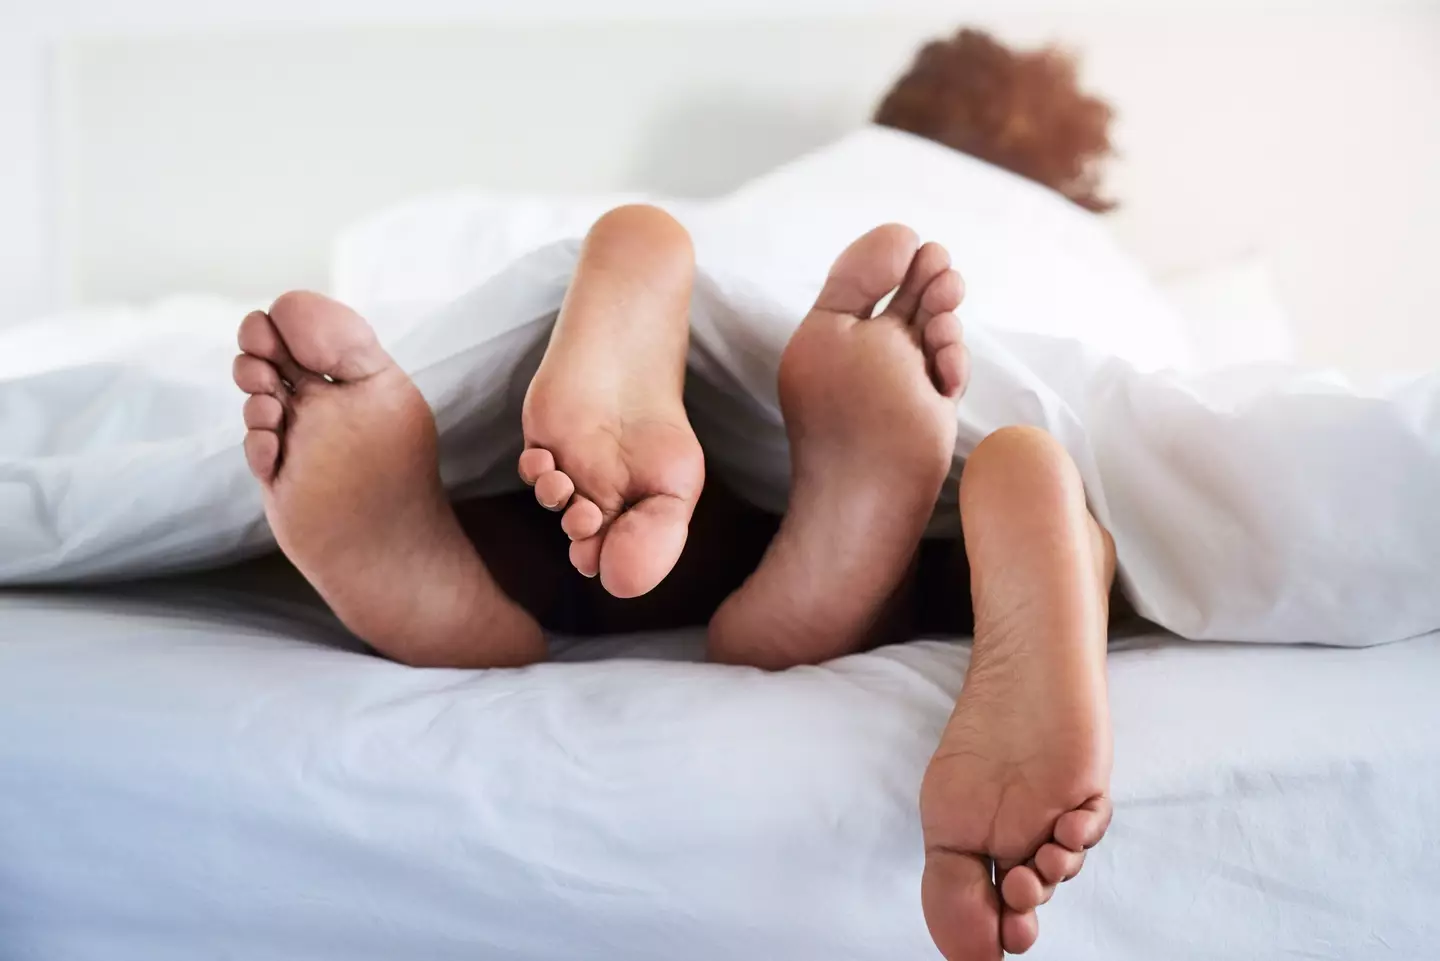 Sexpert Tracey Cox has revealed the seven things men judge you on in bed.